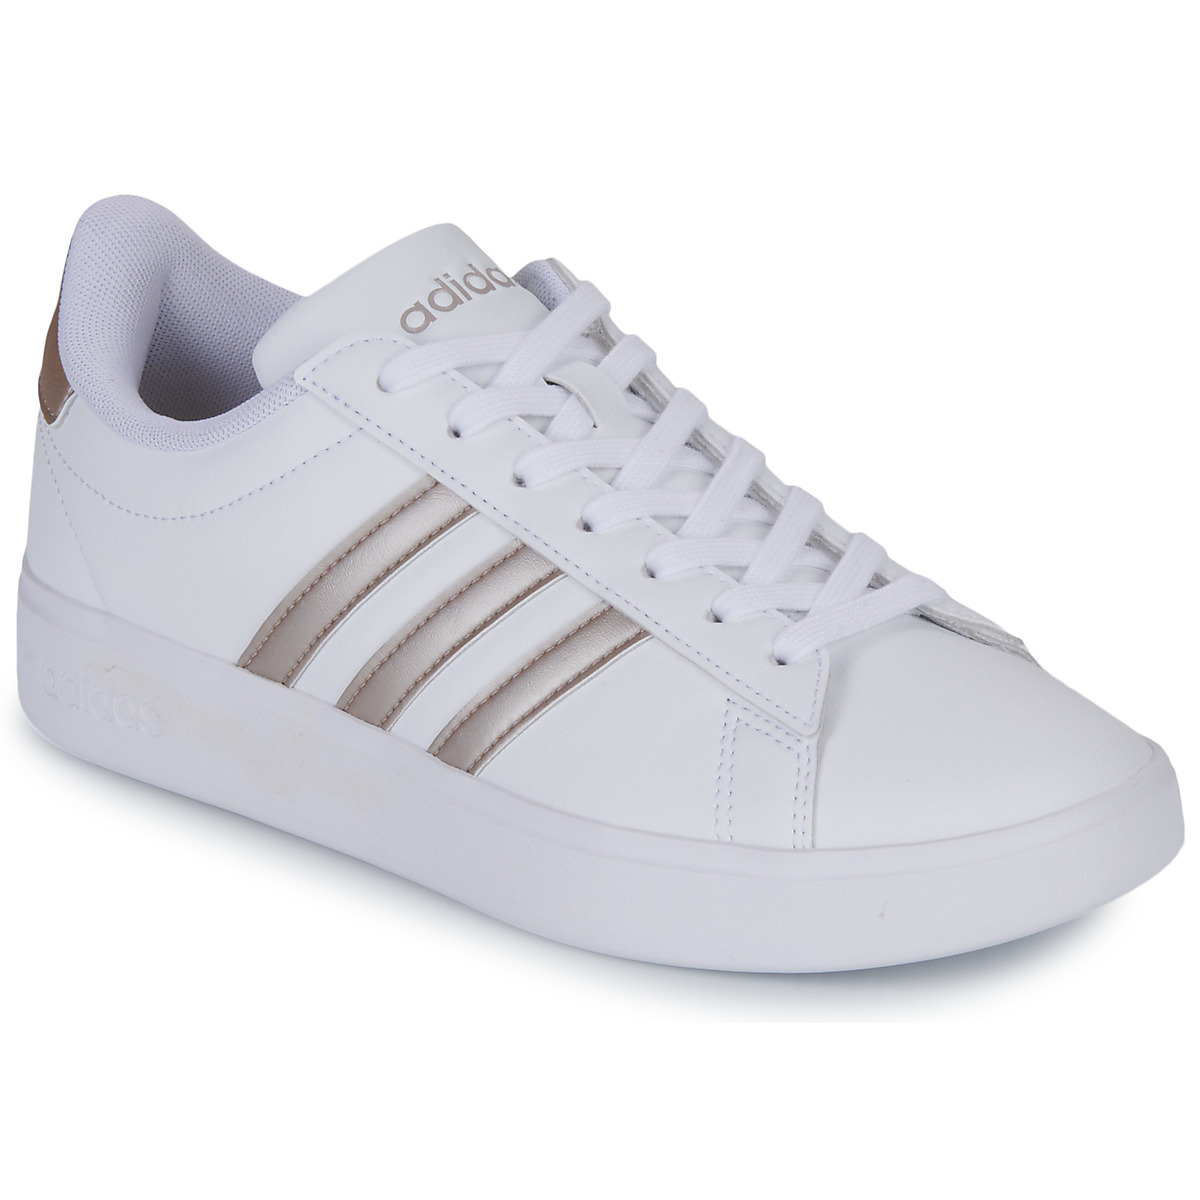 Chaussures Femme adidas spezial green and white gold color scheme GRAND COURT 2.0 Blanc / Argent